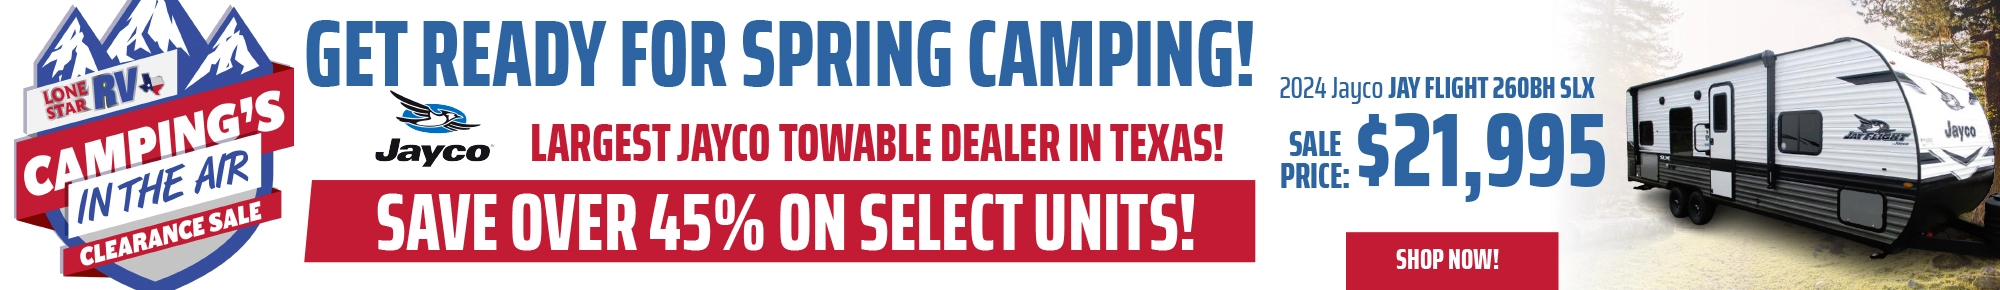 Camping's In The Air Clearance Sale